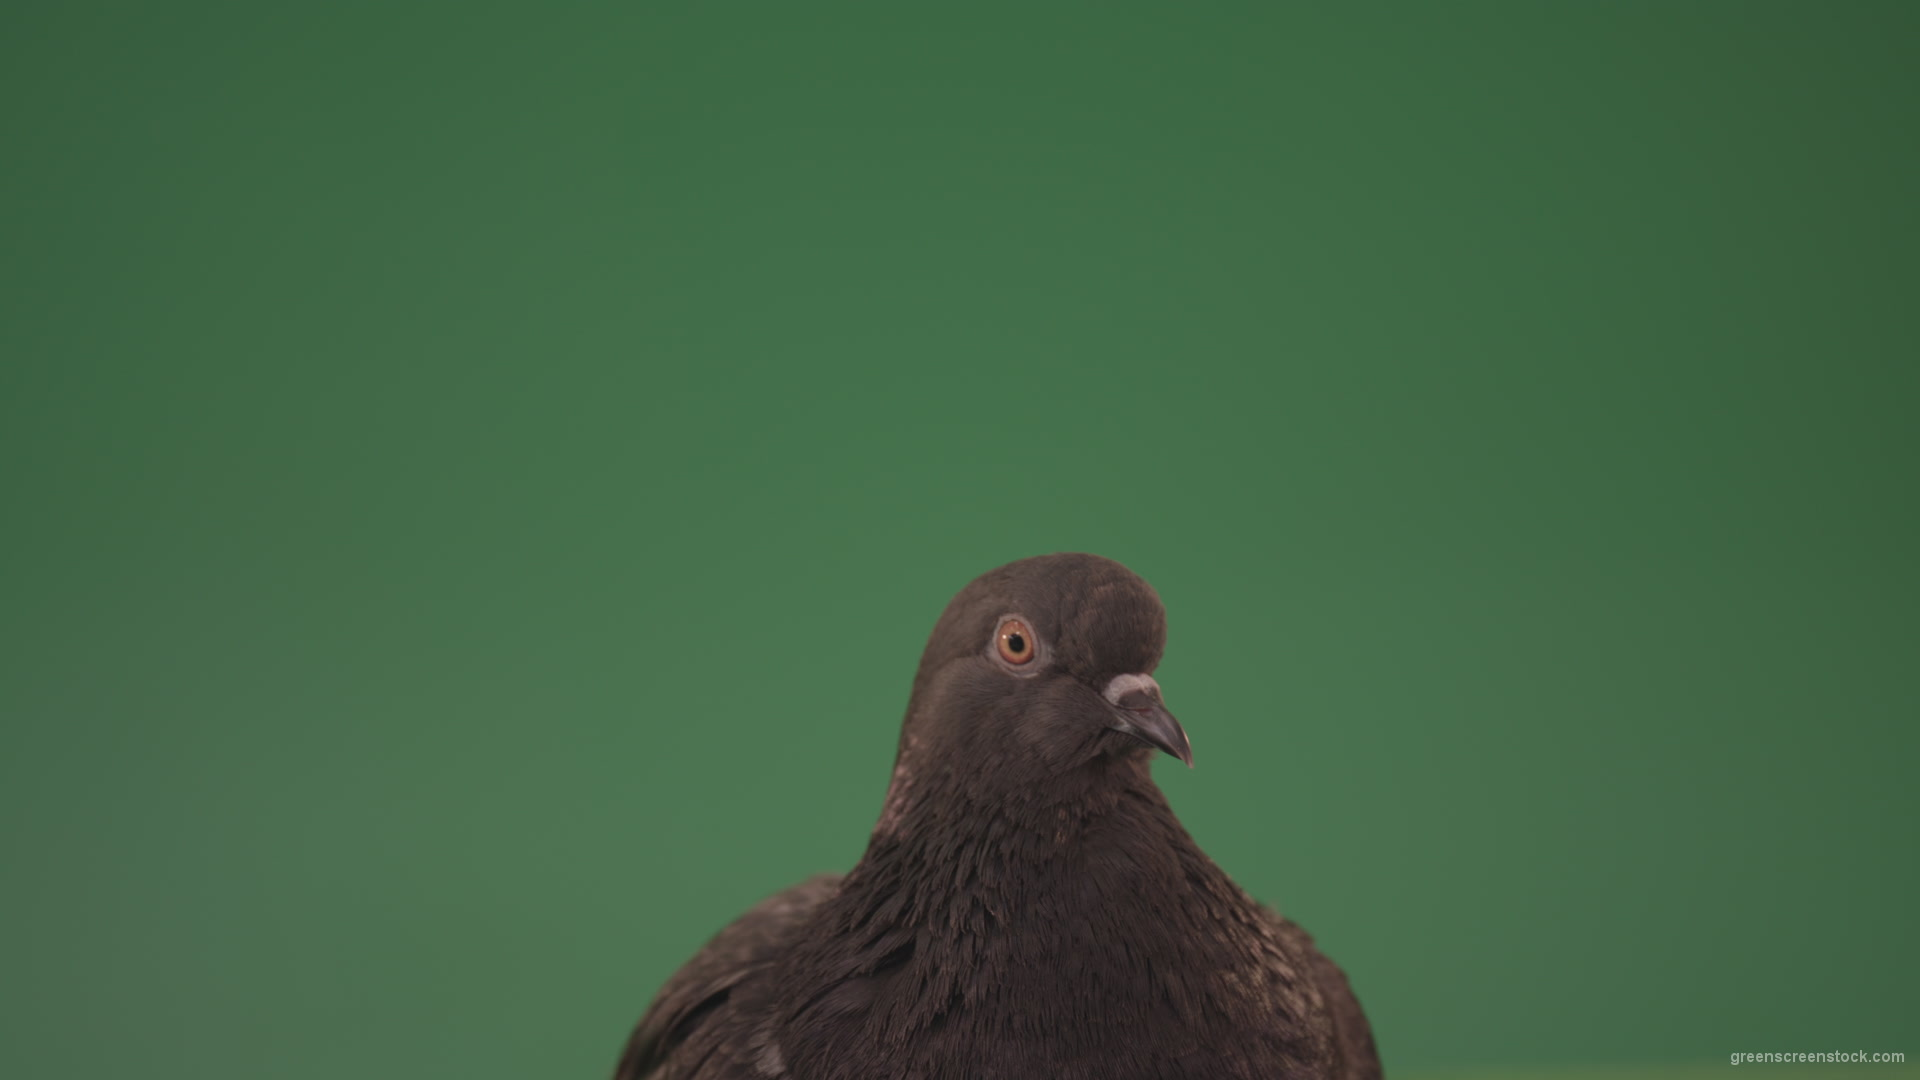 Pigeon-came-to-rest-after-a-long-flight-isolated-on-chromakey-background_006 Green Screen Stock